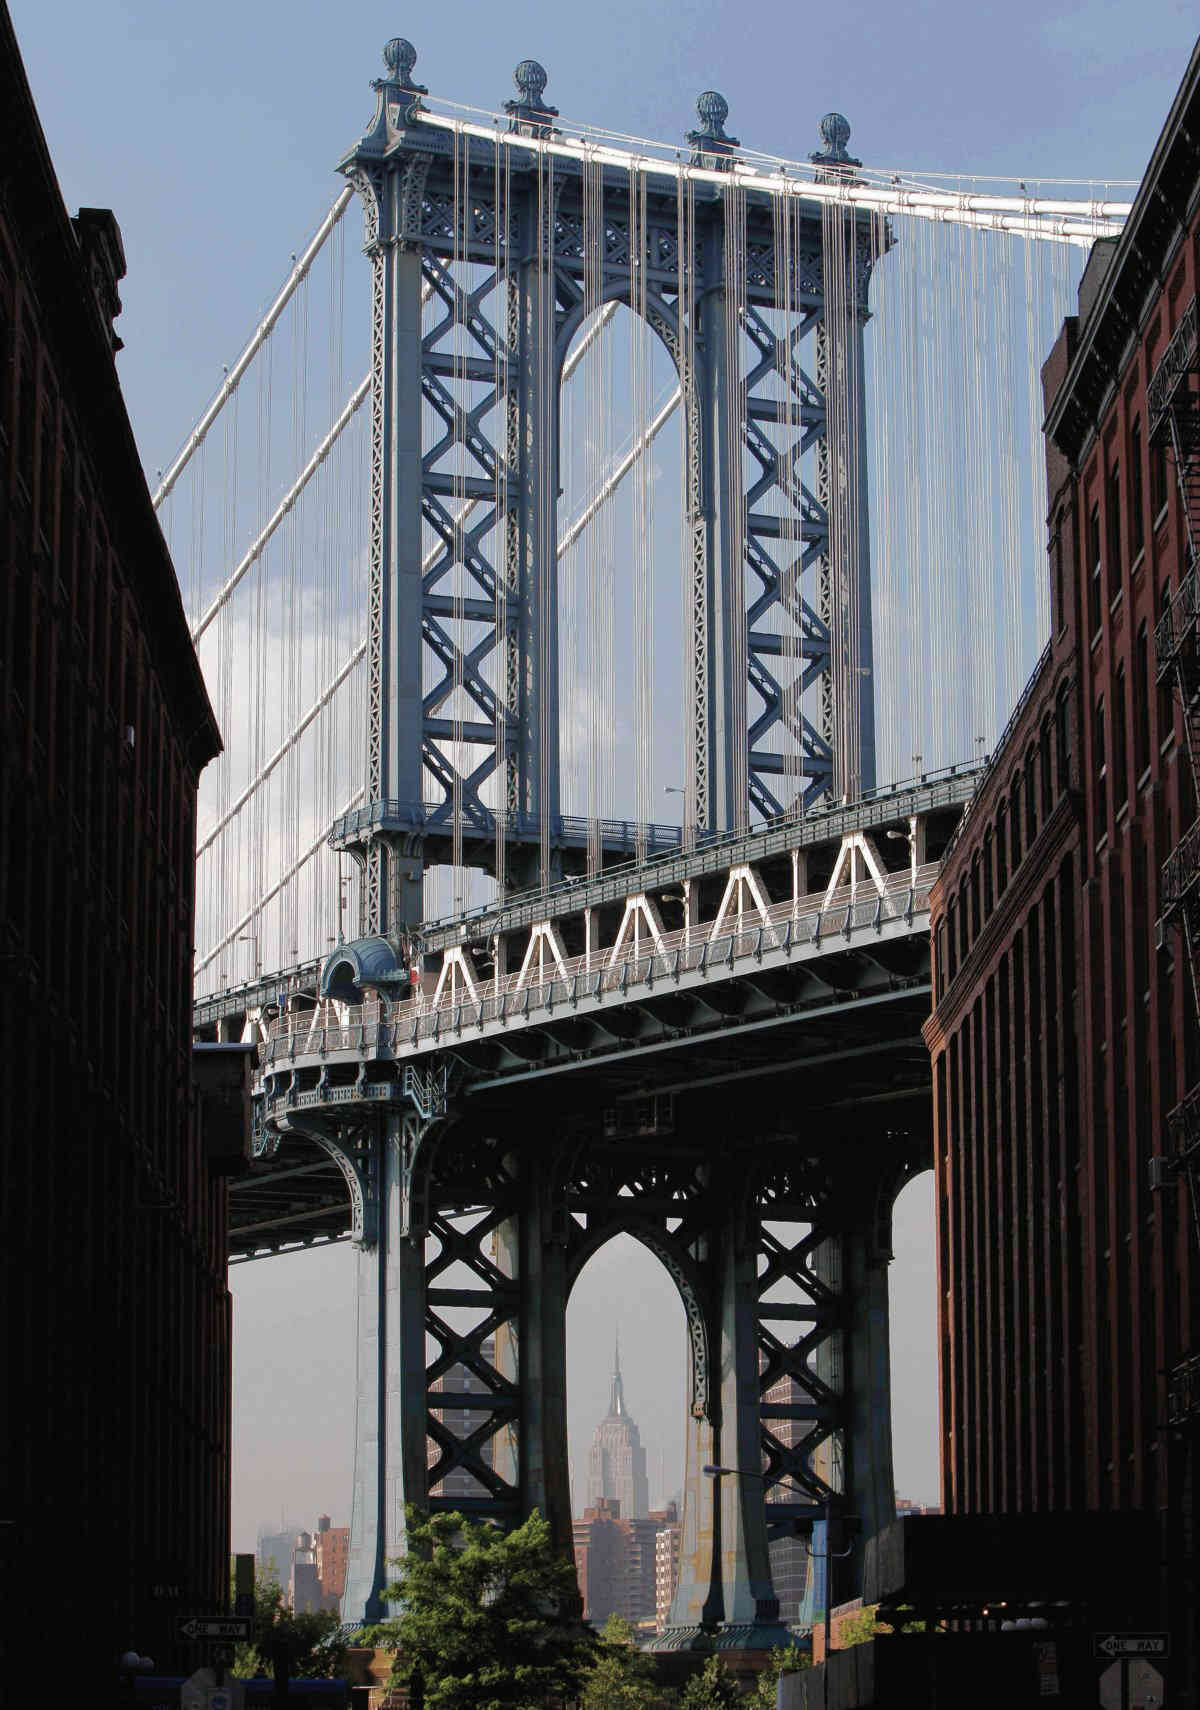 Dumb No New Towers Will Ruin Nabe S View Of Empire State Building Framed By Manhattan Bridge Locals Say Brooklyn Paper